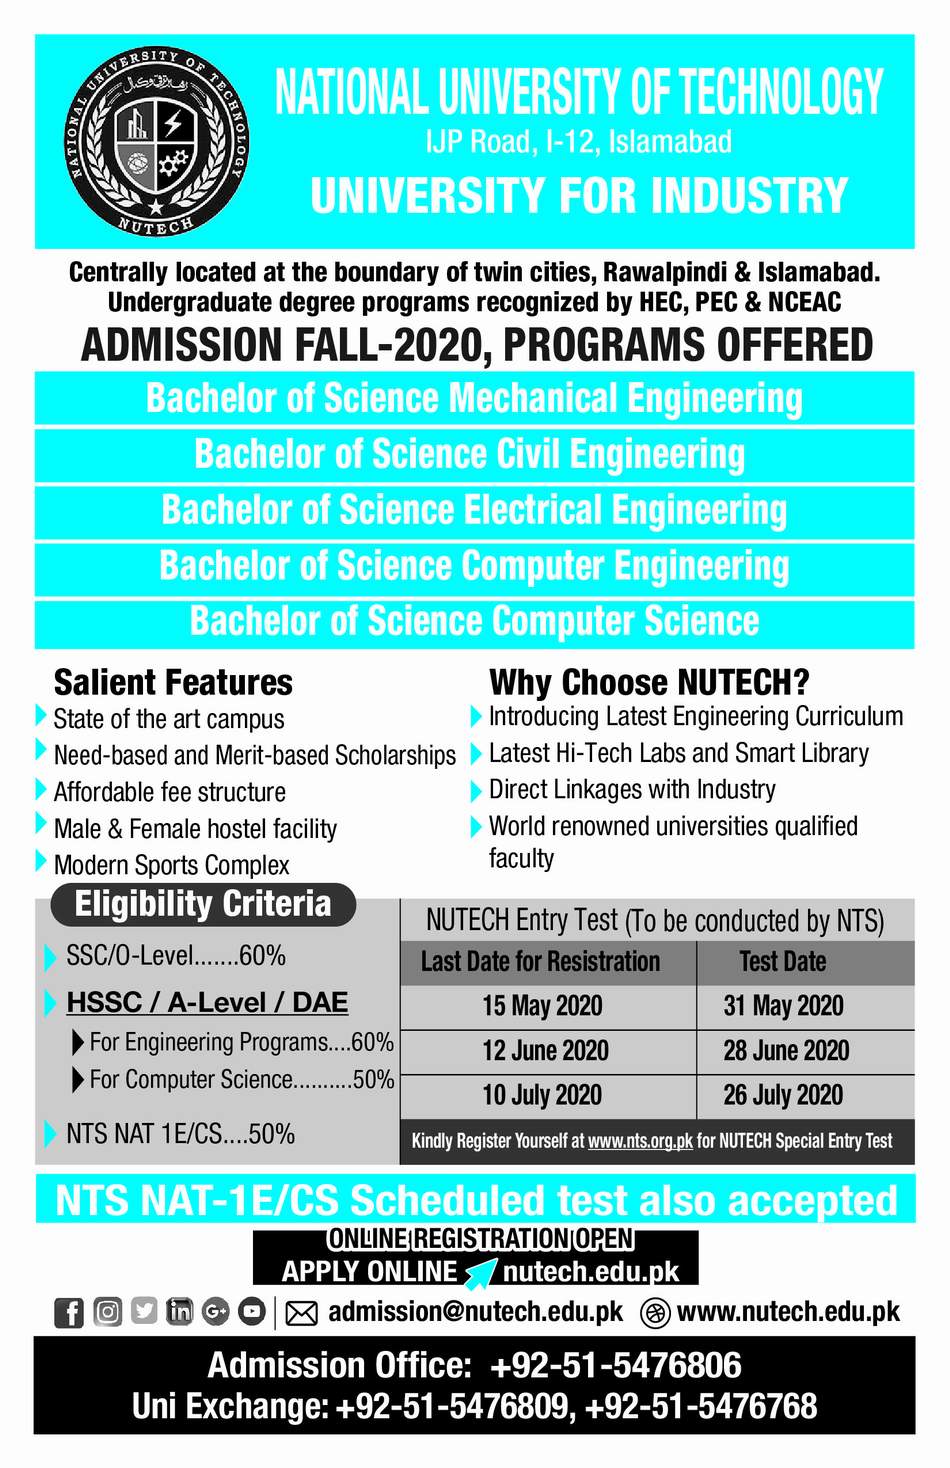 NUTECH Ad